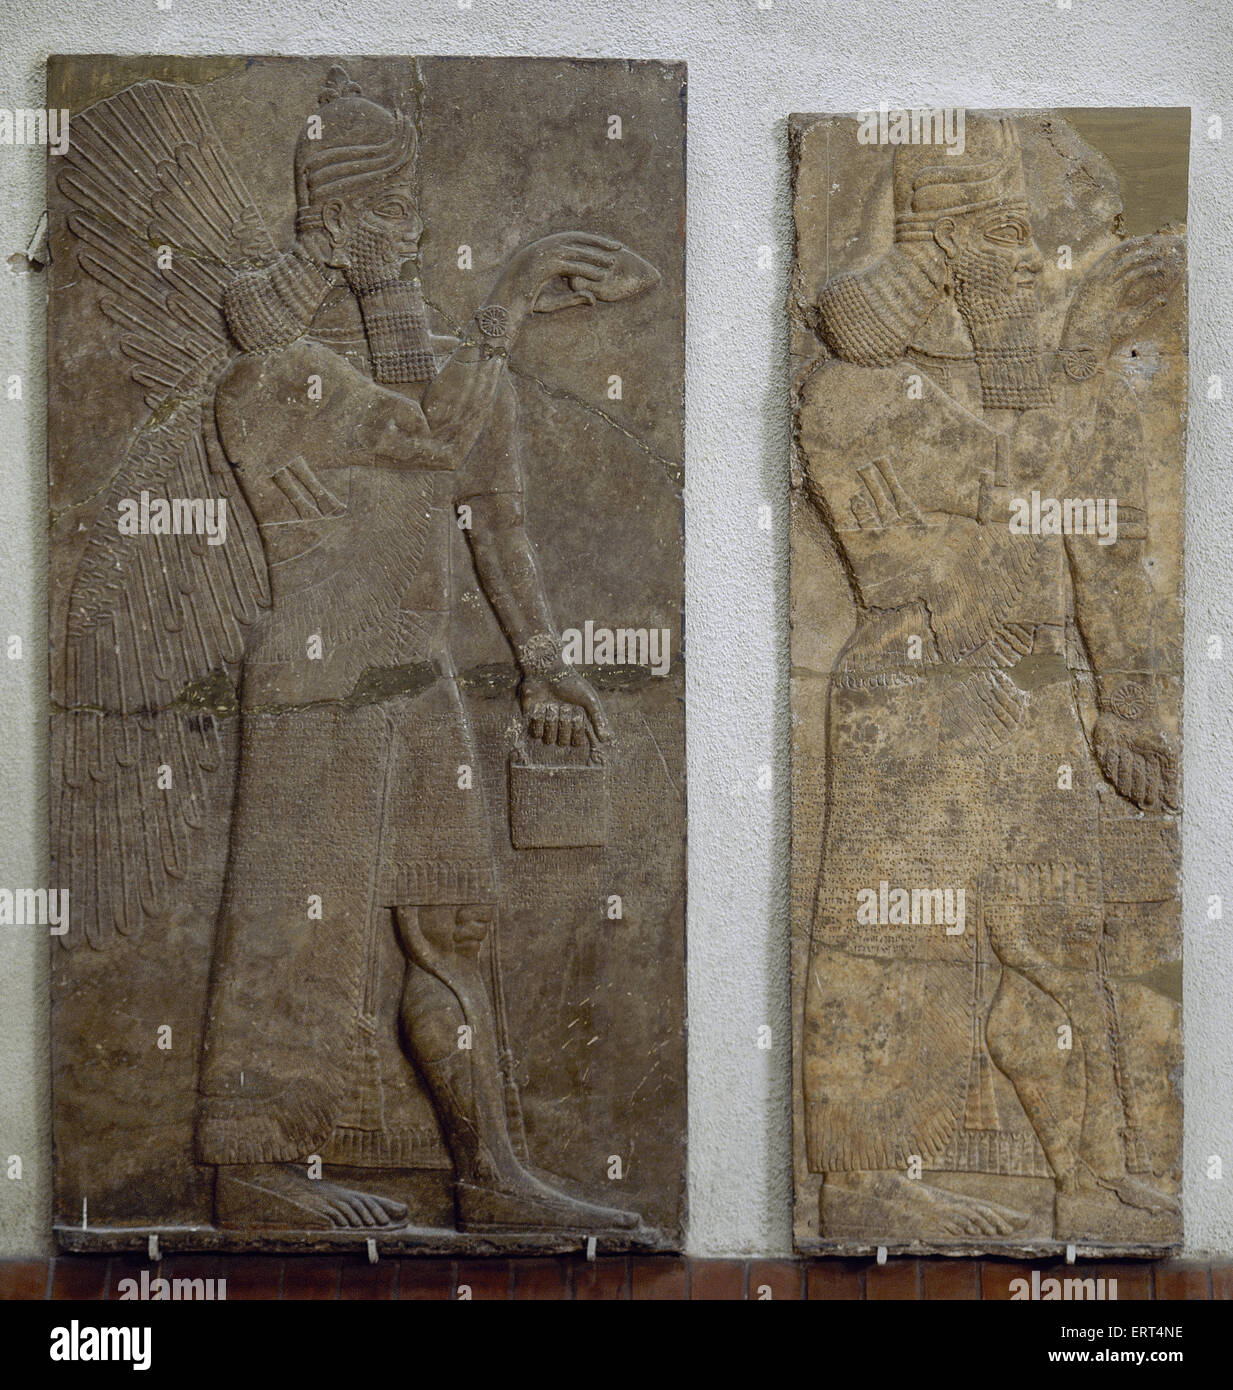 Chaldean Assyrian relief sculpture slab from the northwest palace of King Ashurnasirpal II of a Genie standing. 881-859 BC. from Nimrud. Istanbul Archaeological Museum. Turkey. Stock Photo